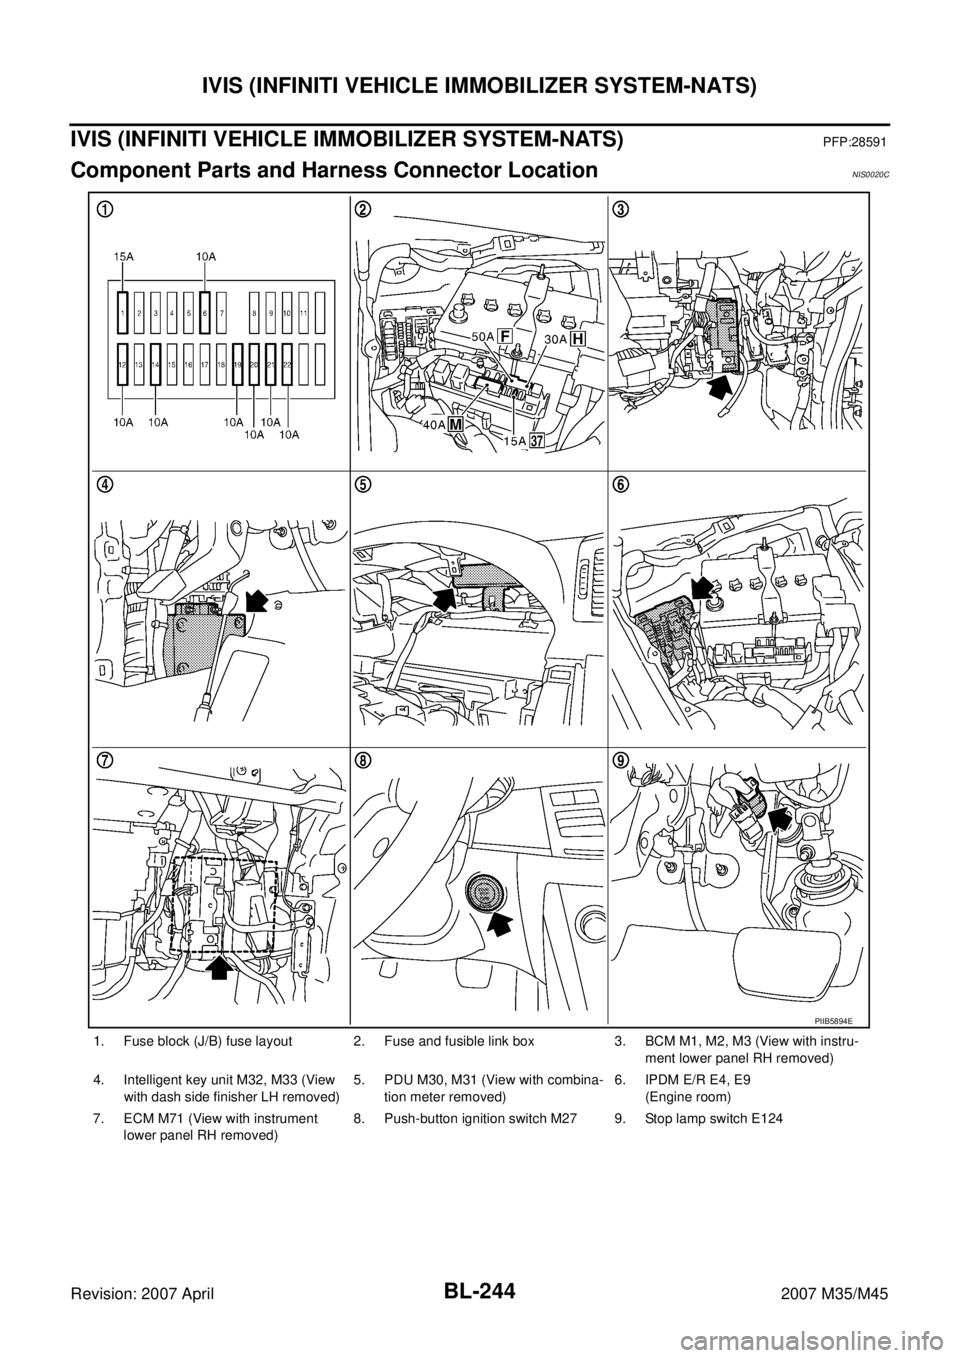 INFINITI M35 2007  Factory Service Manual BL-244
IVIS (INFINITI VEHICLE IMMOBILIZER SYSTEM-NATS)
Revision: 2007 April2007 M35/M45
IVIS (INFINITI VEHICLE IMMOBILIZER SYSTEM-NATS)PFP:28591
Component Parts and Harness Connector LocationNIS0020C
